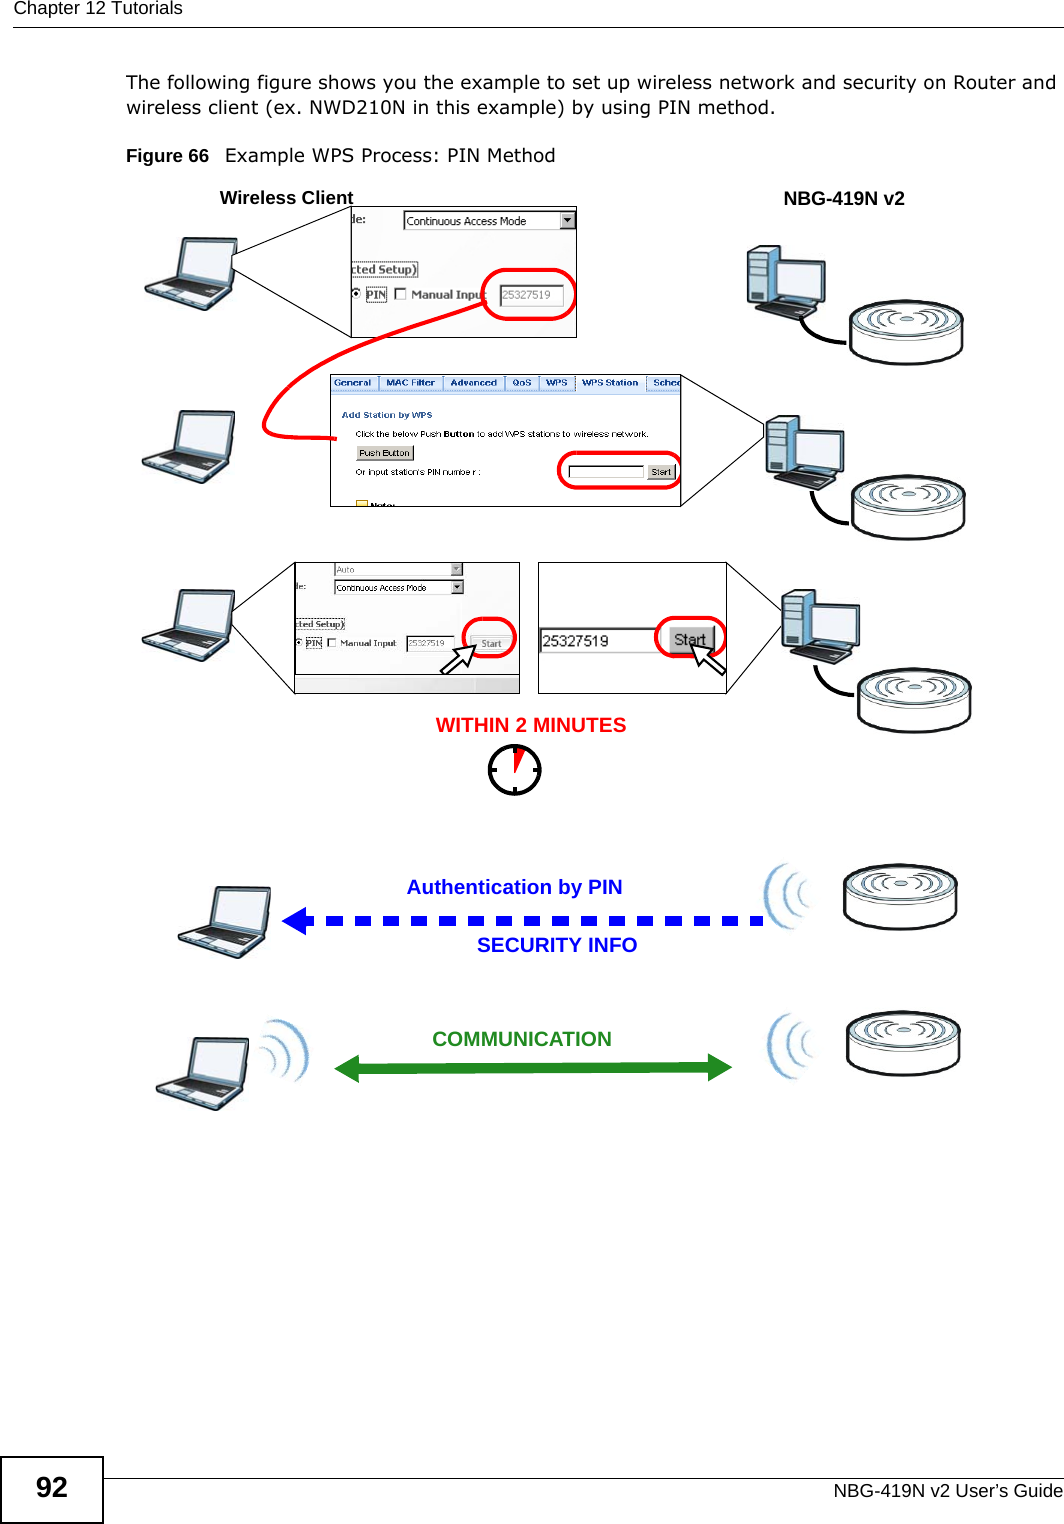 Chapter 12 TutorialsNBG-419N v2 User’s Guide92The following figure shows you the example to set up wireless network and security on Router and wireless client (ex. NWD210N in this example) by using PIN method. Figure 66   Example WPS Process: PIN MethodAuthentication by PINSECURITY INFOWITHIN 2 MINUTESWireless ClientNBG-419N v2COMMUNICATION